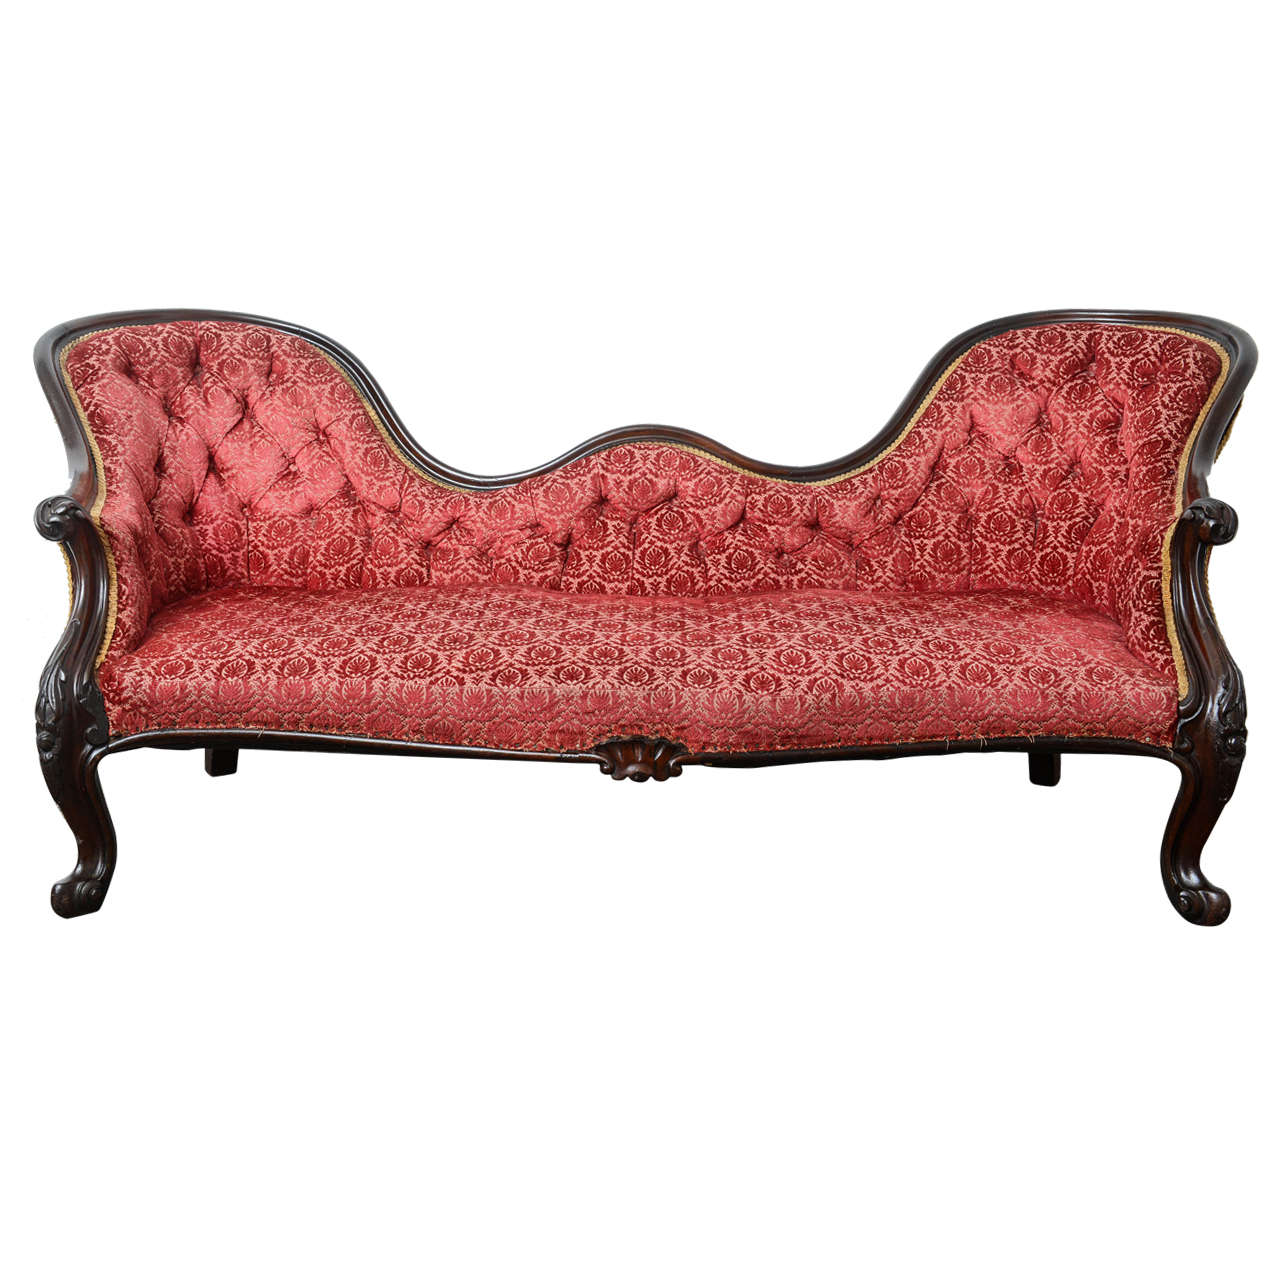 19th Century English Mahogany Loveseat or Double-Ended Victorian Settee